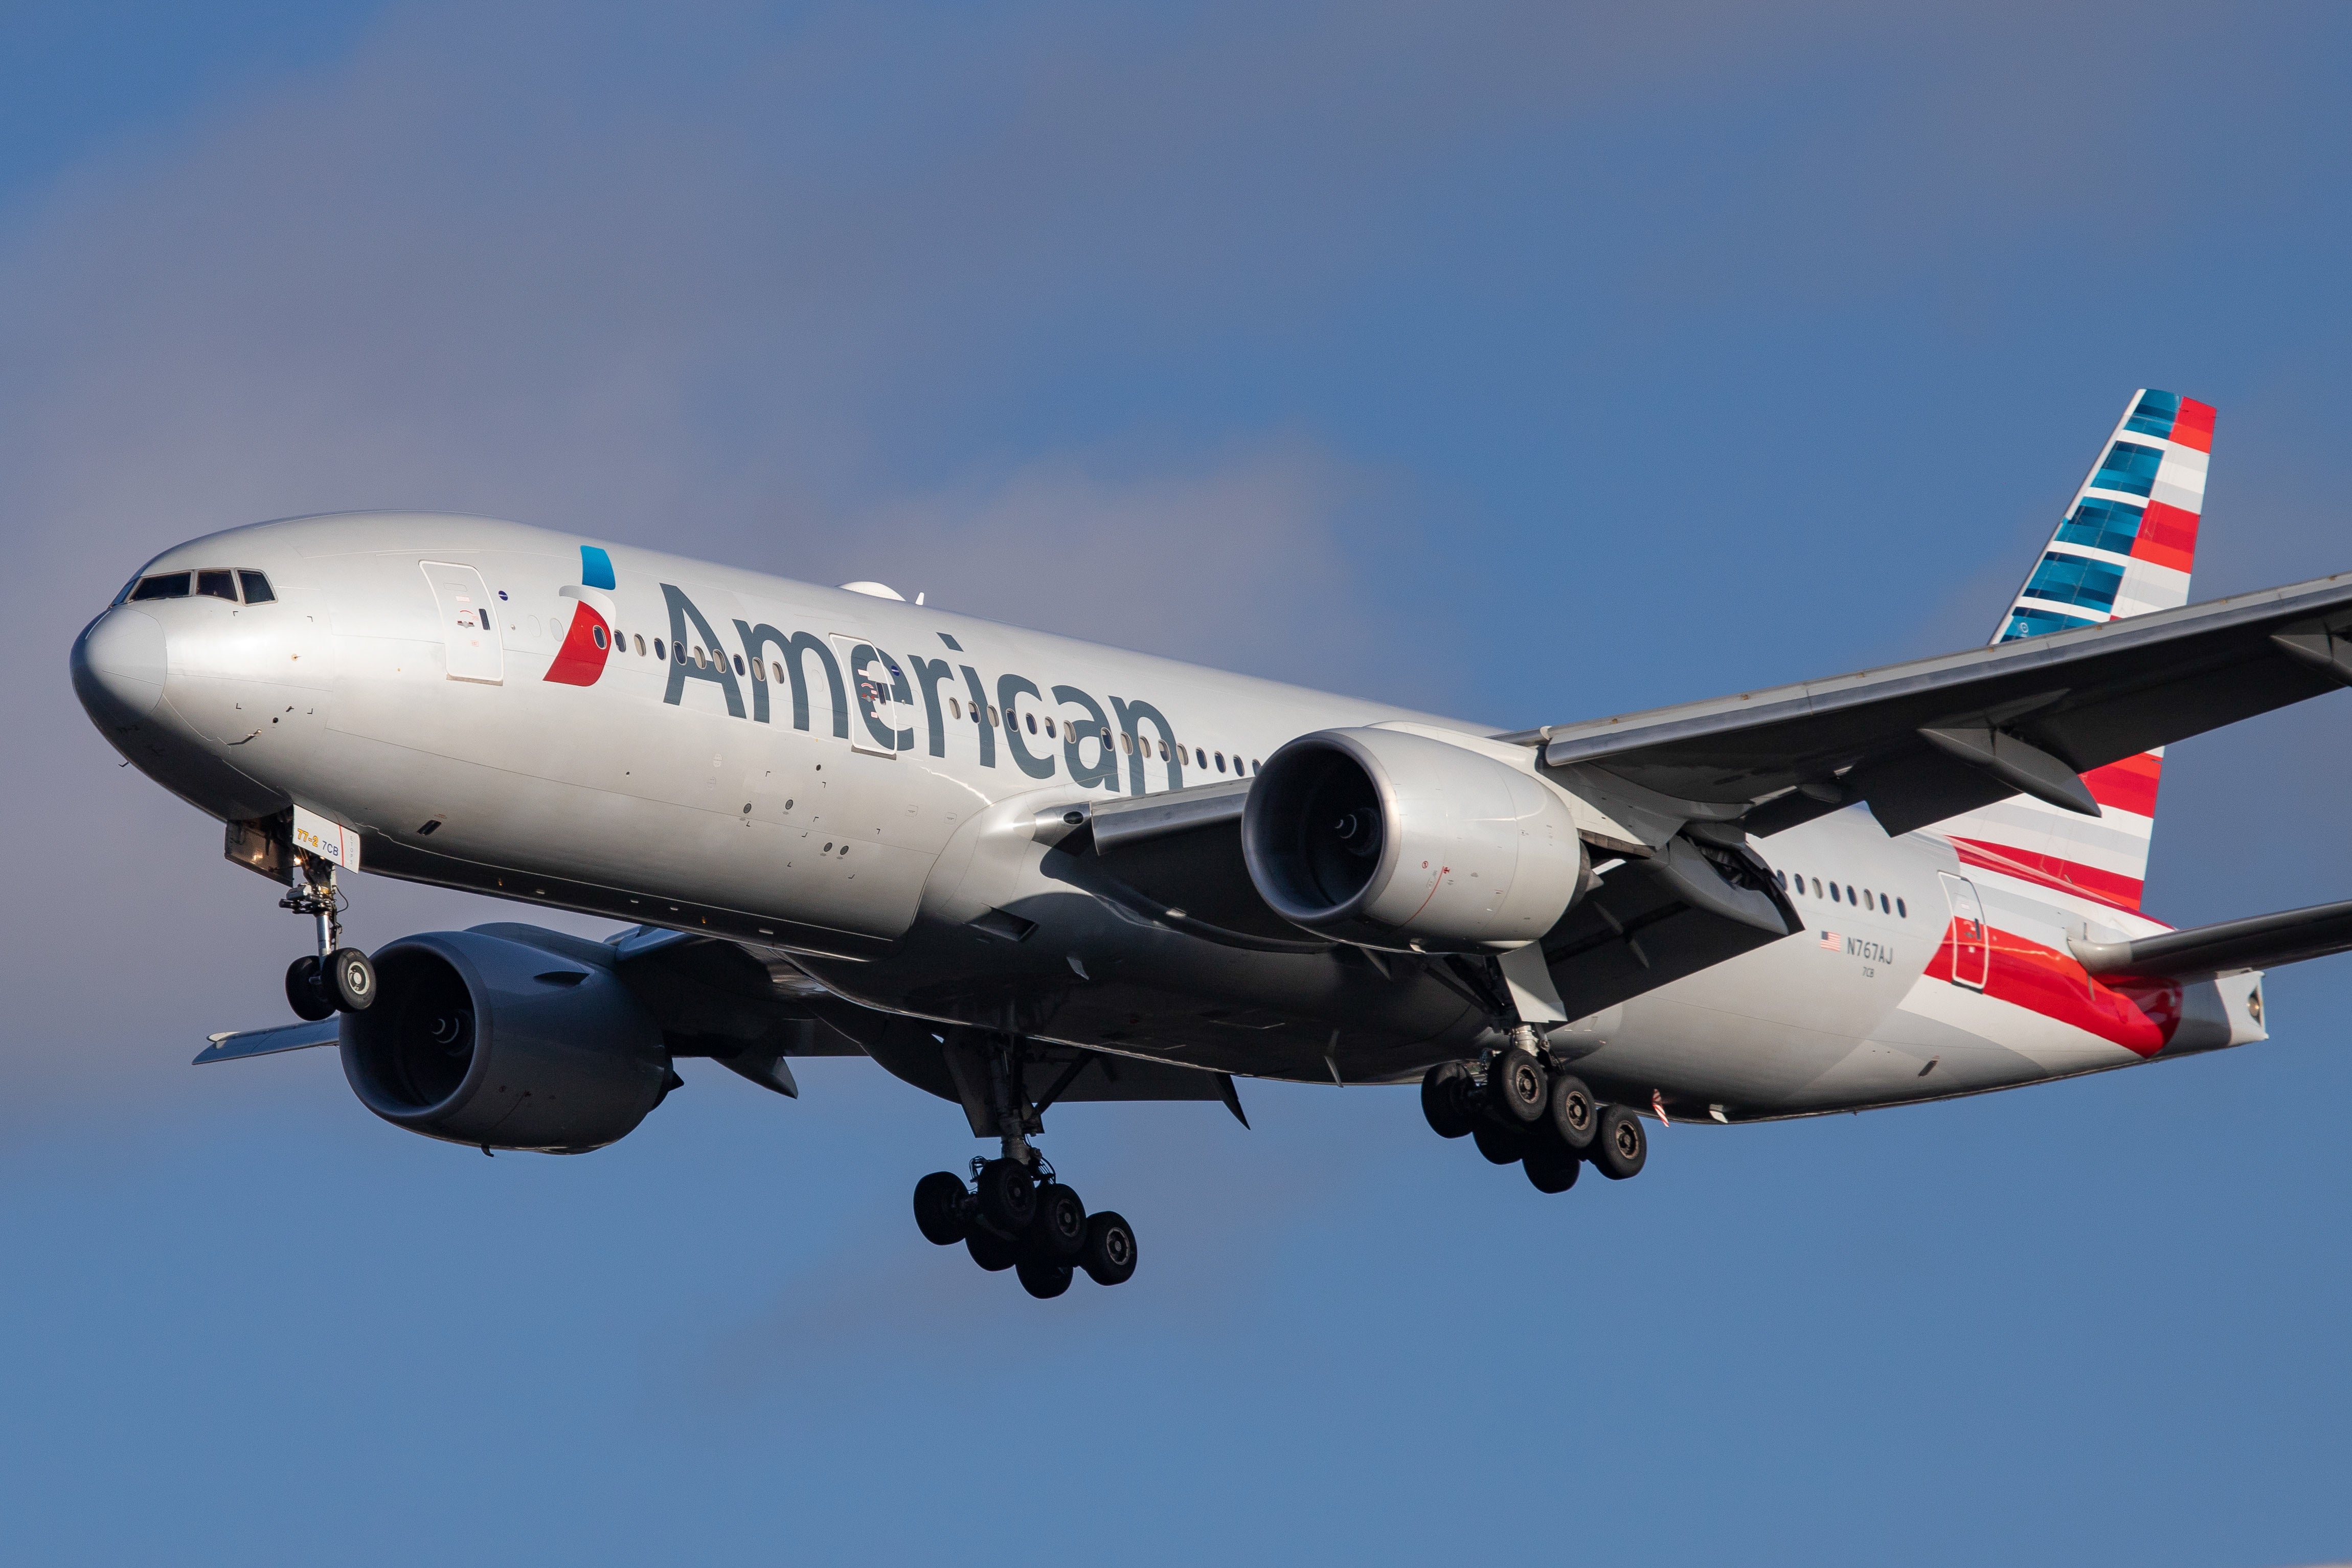 American Airlines Boeing 777-200 aircraft seen flying on final approach, while landing at London Heathrow International Airport. (Photo by Nicolas Economou/NurPhoto via Getty Images)